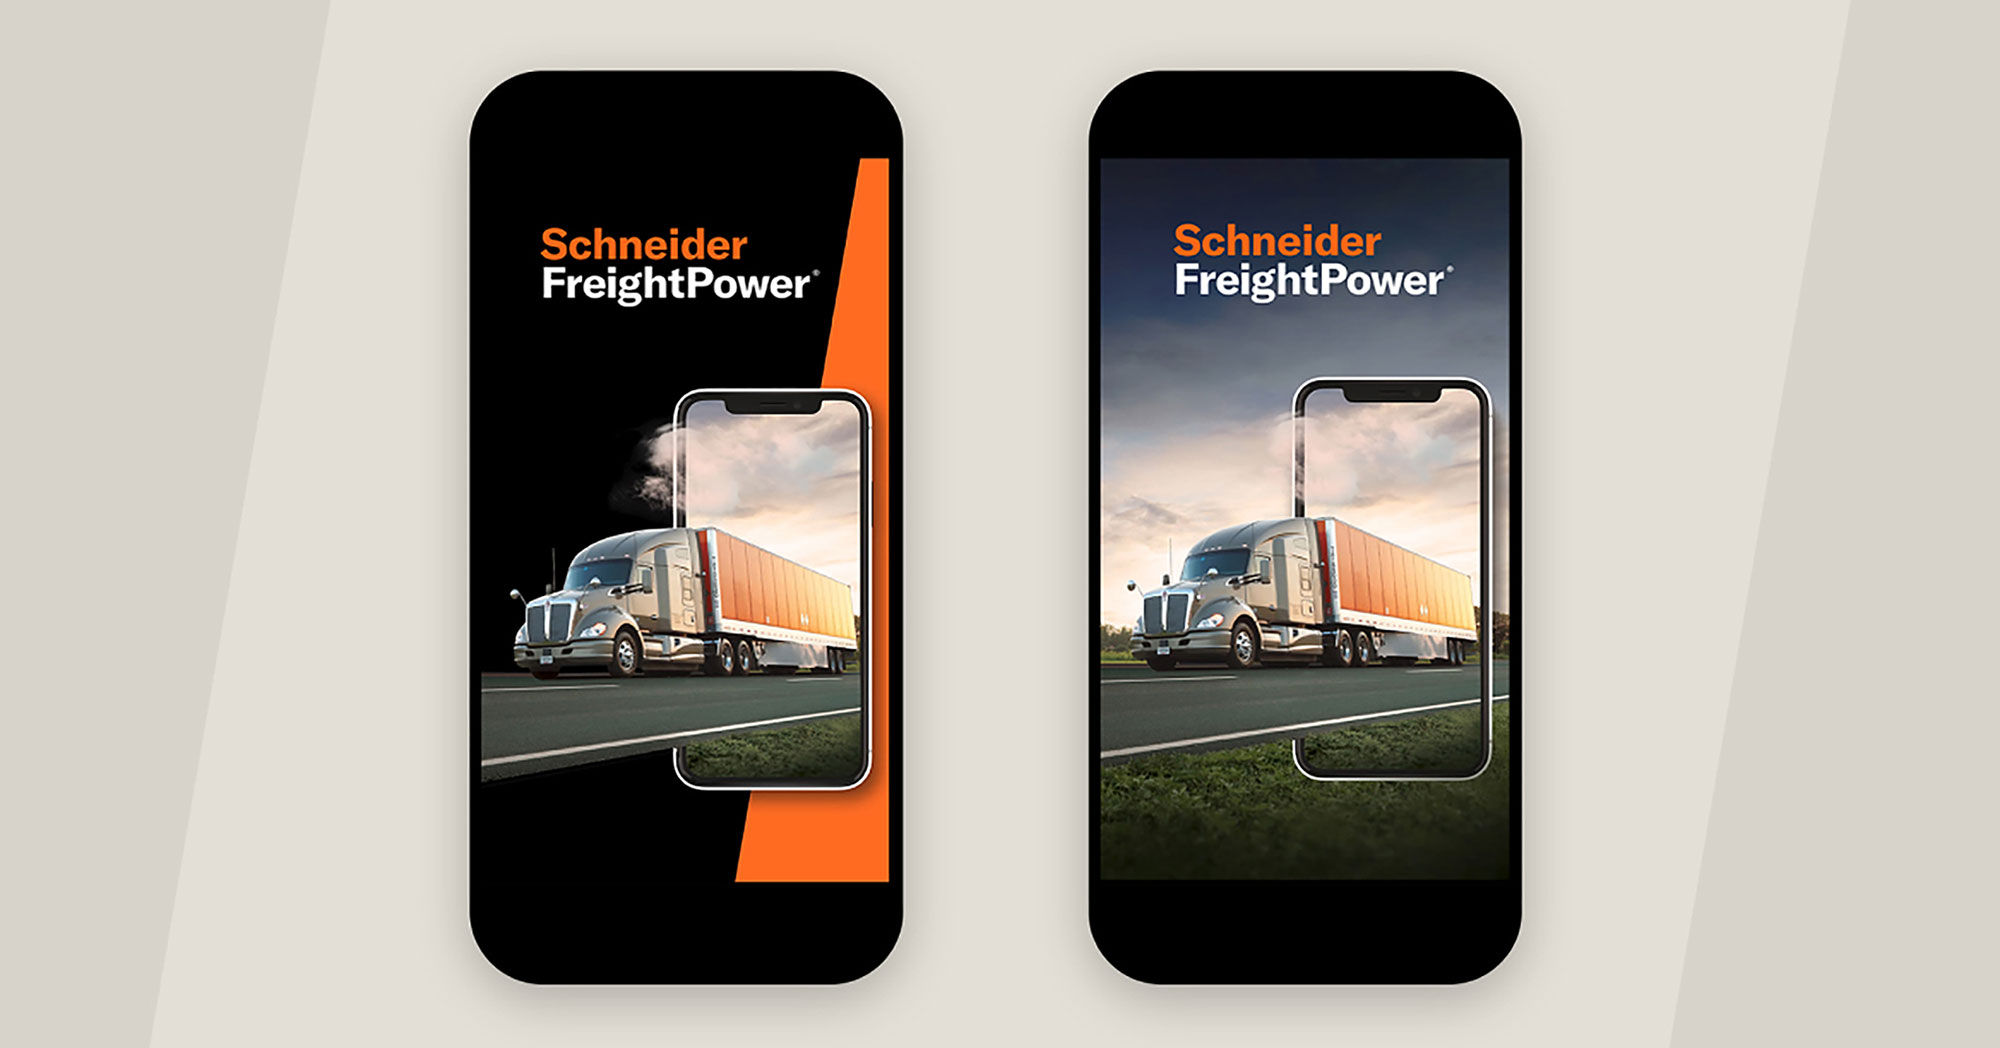 Schneider freightpower social media ads featuring a truck on the road